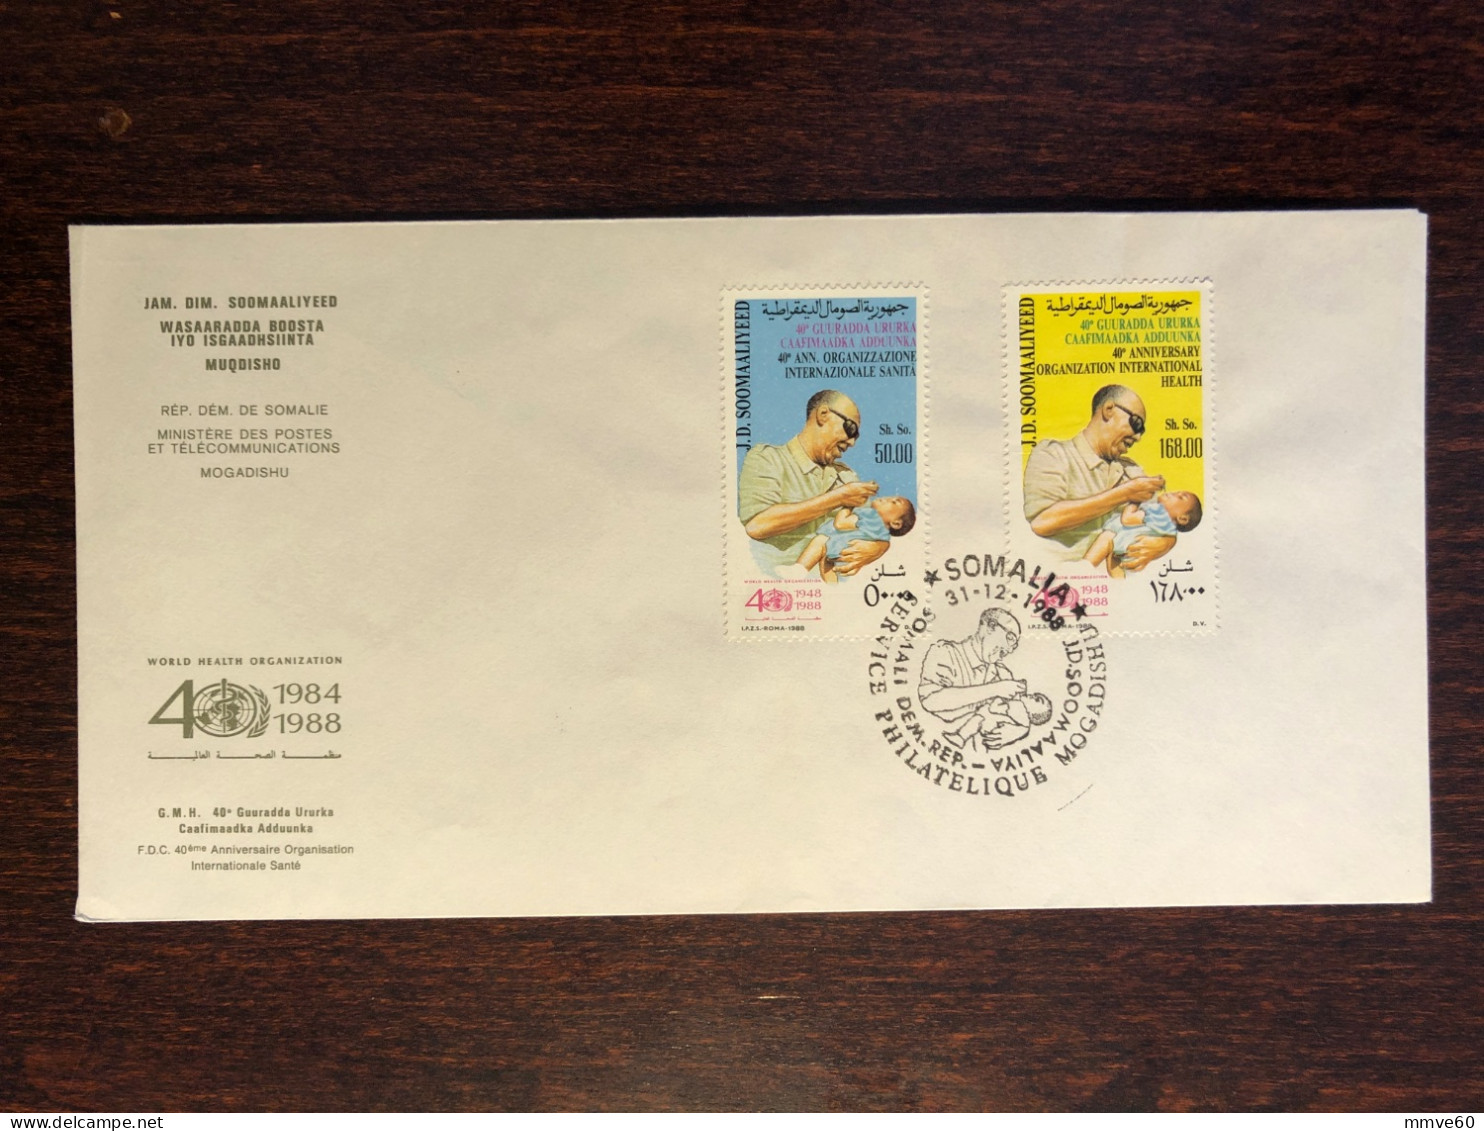 SOMALIA  FDC COVER 1988 YEAR WHO OMS  HEALTH MEDICINE STAMPS - Somalie (1960-...)